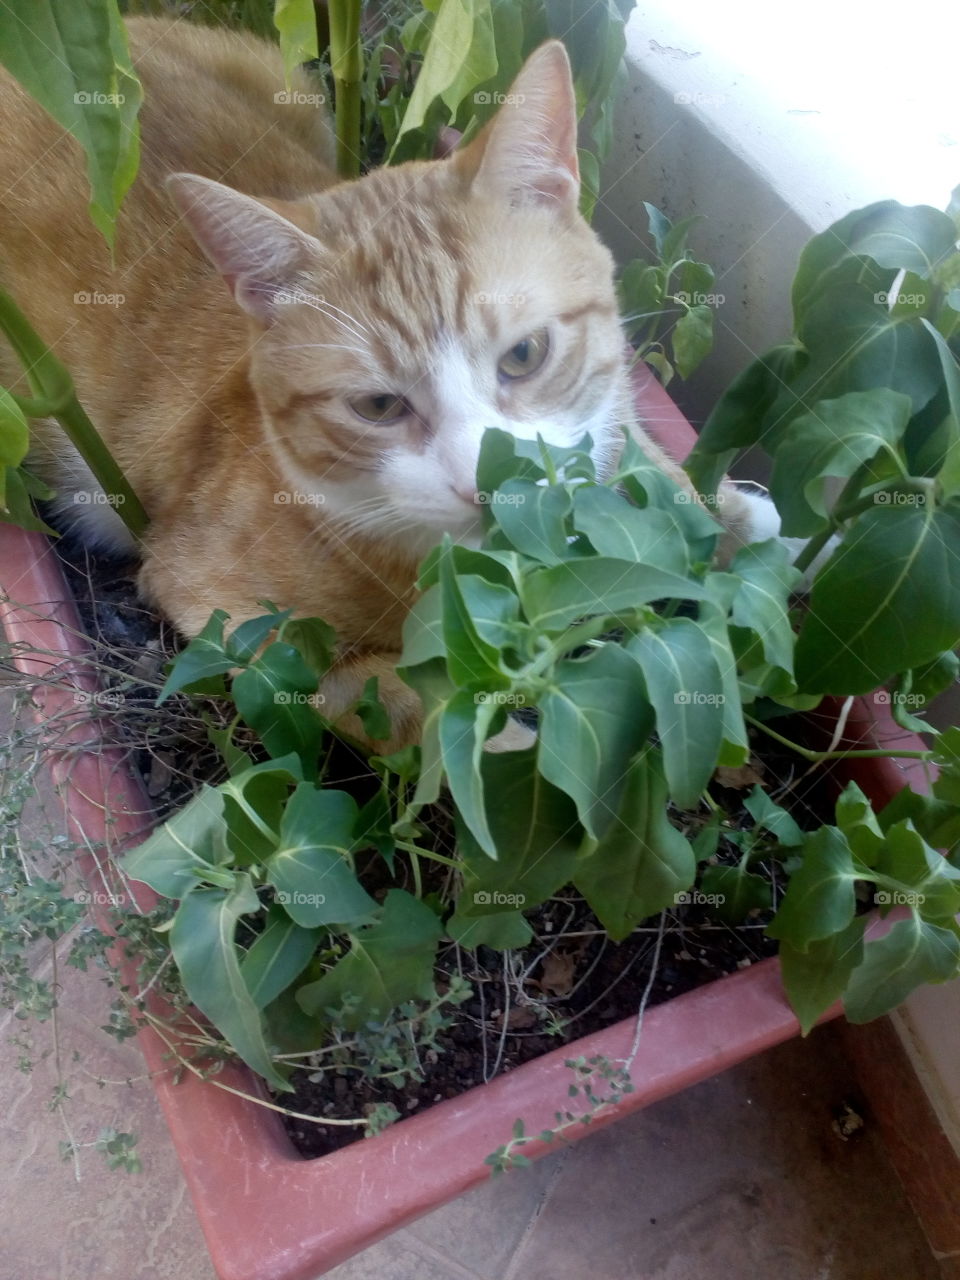 My cat seems to have a romantic attitude, together with the mood for cooling, as he stepped in between the flowers in our balcony